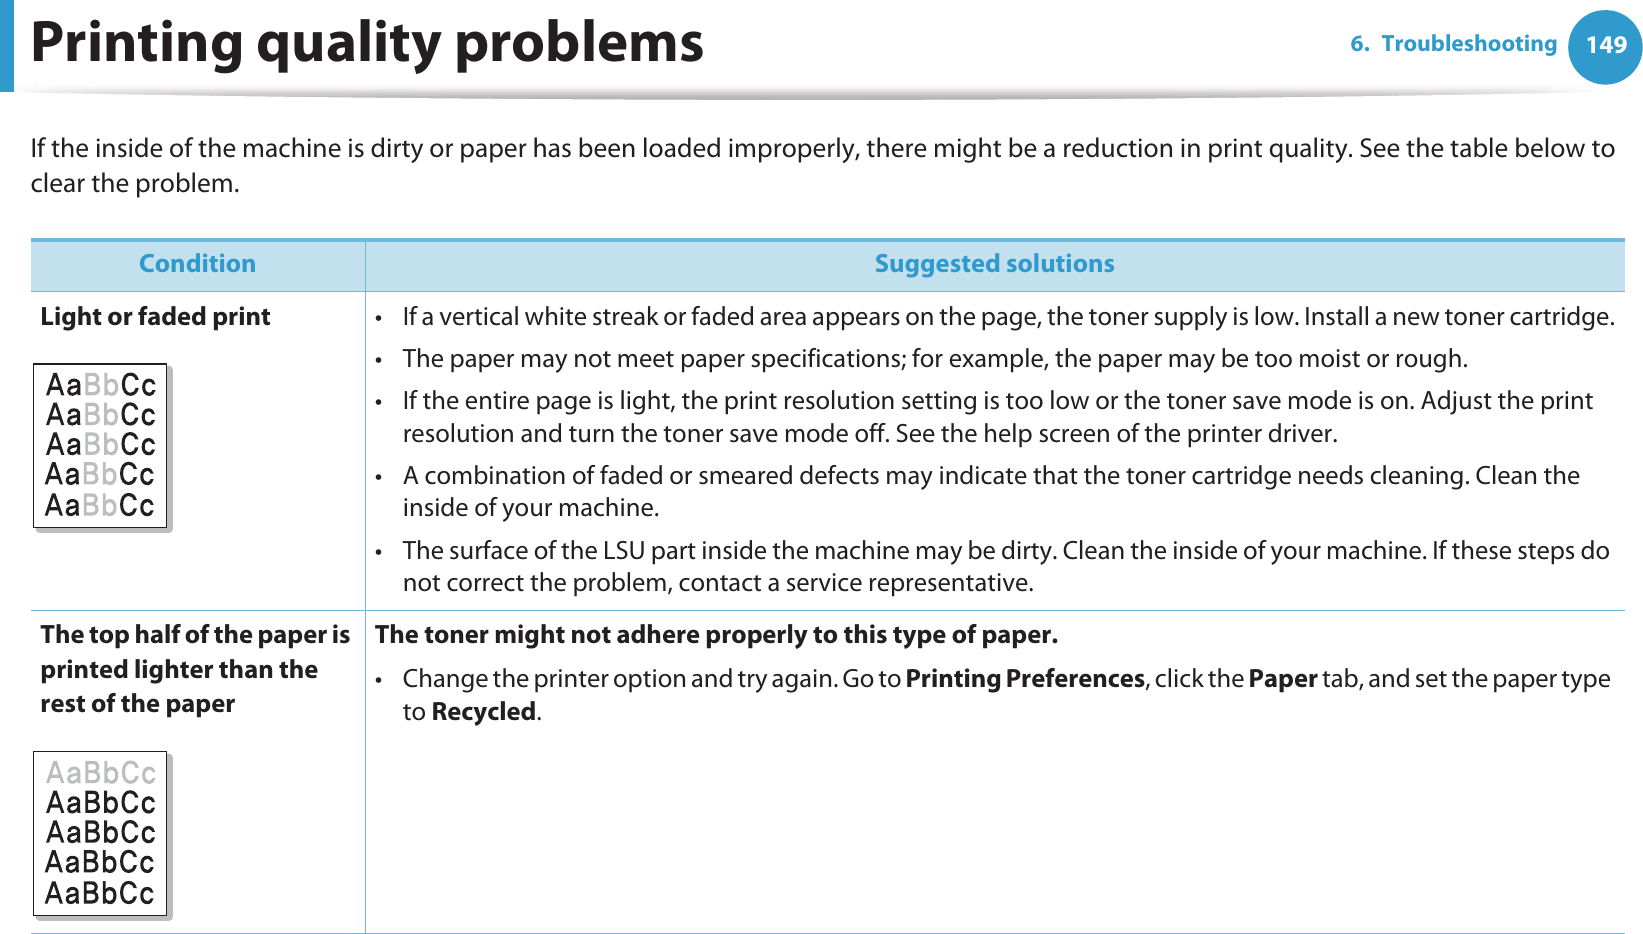 1496. TroubleshootingPrinting quality problemsIf the inside of the machine is dirty or paper has been loaded improperly, there might be a reduction in print quality. See the table below to clear the problem.  Condition Suggested solutionsLight or faded print • If a vertical white streak or faded area appears on the page, the toner supply is low. Install a new toner cartridge.• The paper may not meet paper specifications; for example, the paper may be too moist or rough.• If the entire page is light, the print resolution setting is too low or the toner save mode is on. Adjust the print resolution and turn the toner save mode off. See the help screen of the printer driver.• A combination of faded or smeared defects may indicate that the toner cartridge needs cleaning. Clean the inside of your machine.• The surface of the LSU part inside the machine may be dirty. Clean the inside of your machine. If these steps do not correct the problem, contact a service representative.The top half of the paper is printed lighter than the rest of the paperThe toner might not adhere properly to this type of paper.• Change the printer option and try again. Go to Printing Preferences, click the Paper tab, and set the paper type to Recycled.